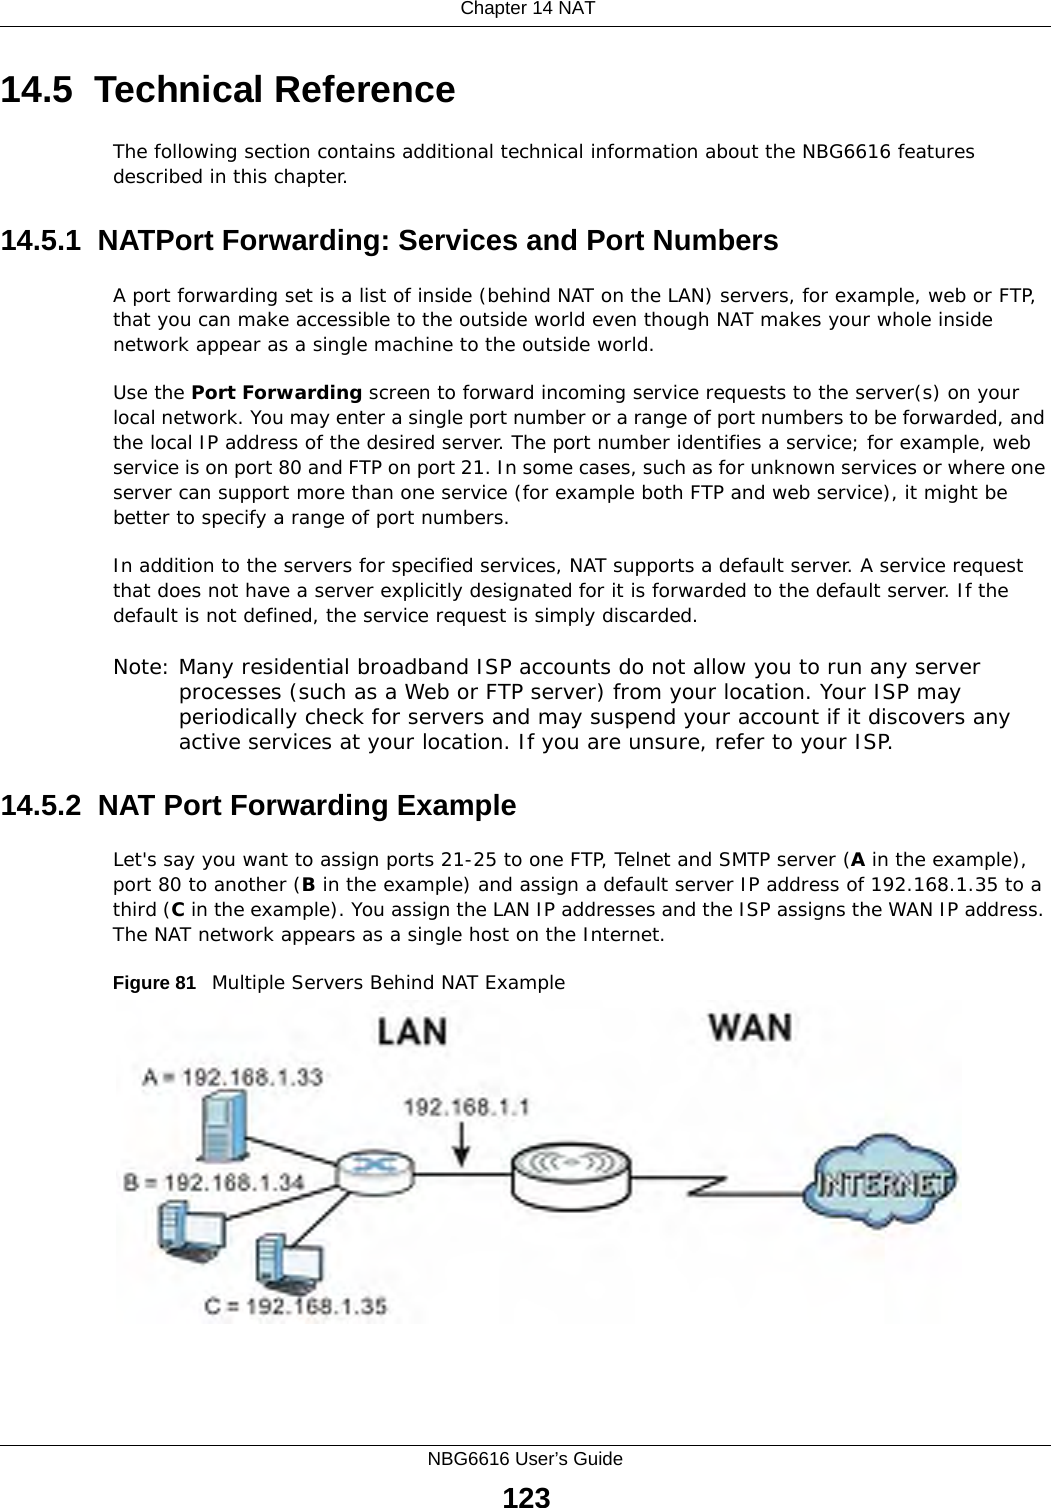  Chapter 14 NATNBG6616 User’s Guide12314.5  Technical ReferenceThe following section contains additional technical information about the NBG6616 features described in this chapter.14.5.1  NATPort Forwarding: Services and Port NumbersA port forwarding set is a list of inside (behind NAT on the LAN) servers, for example, web or FTP, that you can make accessible to the outside world even though NAT makes your whole inside network appear as a single machine to the outside world. Use the Port Forwarding screen to forward incoming service requests to the server(s) on your local network. You may enter a single port number or a range of port numbers to be forwarded, and the local IP address of the desired server. The port number identifies a service; for example, web service is on port 80 and FTP on port 21. In some cases, such as for unknown services or where one server can support more than one service (for example both FTP and web service), it might be better to specify a range of port numbers.In addition to the servers for specified services, NAT supports a default server. A service request that does not have a server explicitly designated for it is forwarded to the default server. If the default is not defined, the service request is simply discarded.Note: Many residential broadband ISP accounts do not allow you to run any server processes (such as a Web or FTP server) from your location. Your ISP may periodically check for servers and may suspend your account if it discovers any active services at your location. If you are unsure, refer to your ISP.14.5.2  NAT Port Forwarding ExampleLet&apos;s say you want to assign ports 21-25 to one FTP, Telnet and SMTP server (A in the example), port 80 to another (B in the example) and assign a default server IP address of 192.168.1.35 to a third (C in the example). You assign the LAN IP addresses and the ISP assigns the WAN IP address. The NAT network appears as a single host on the Internet.Figure 81   Multiple Servers Behind NAT Example